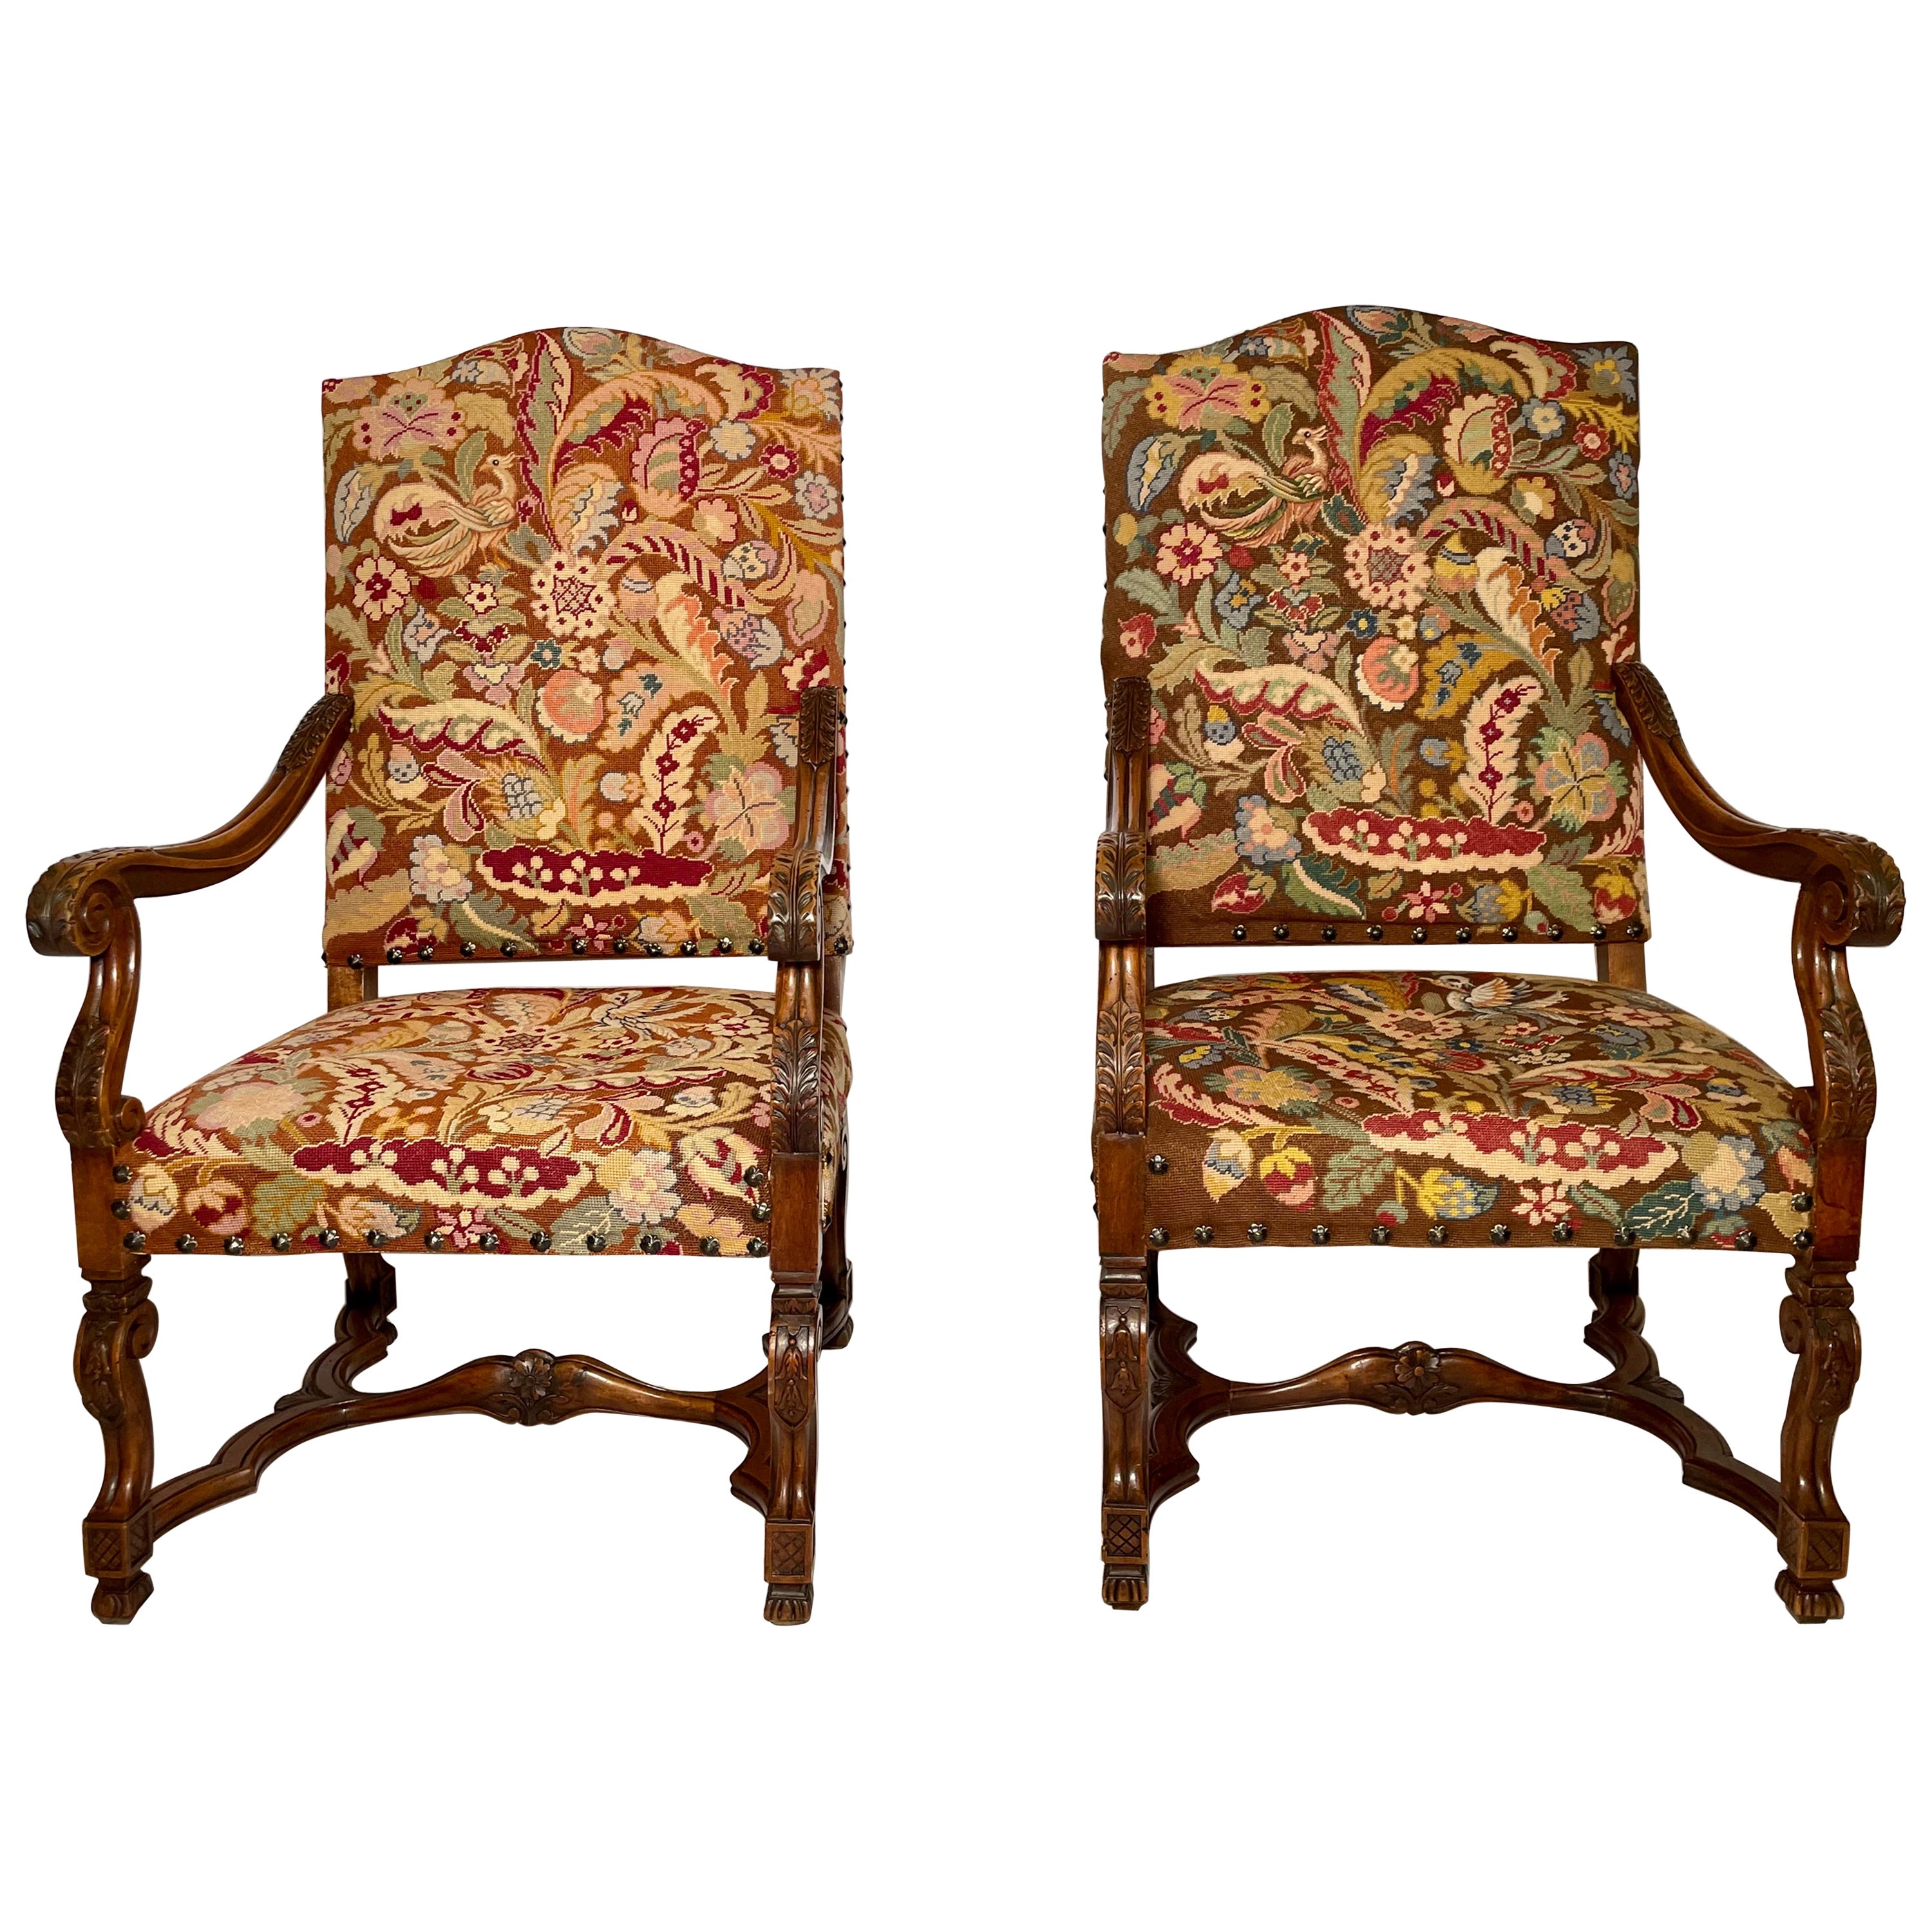 Pair of Antique French Walnut Armchairs, circa 1880 For Sale